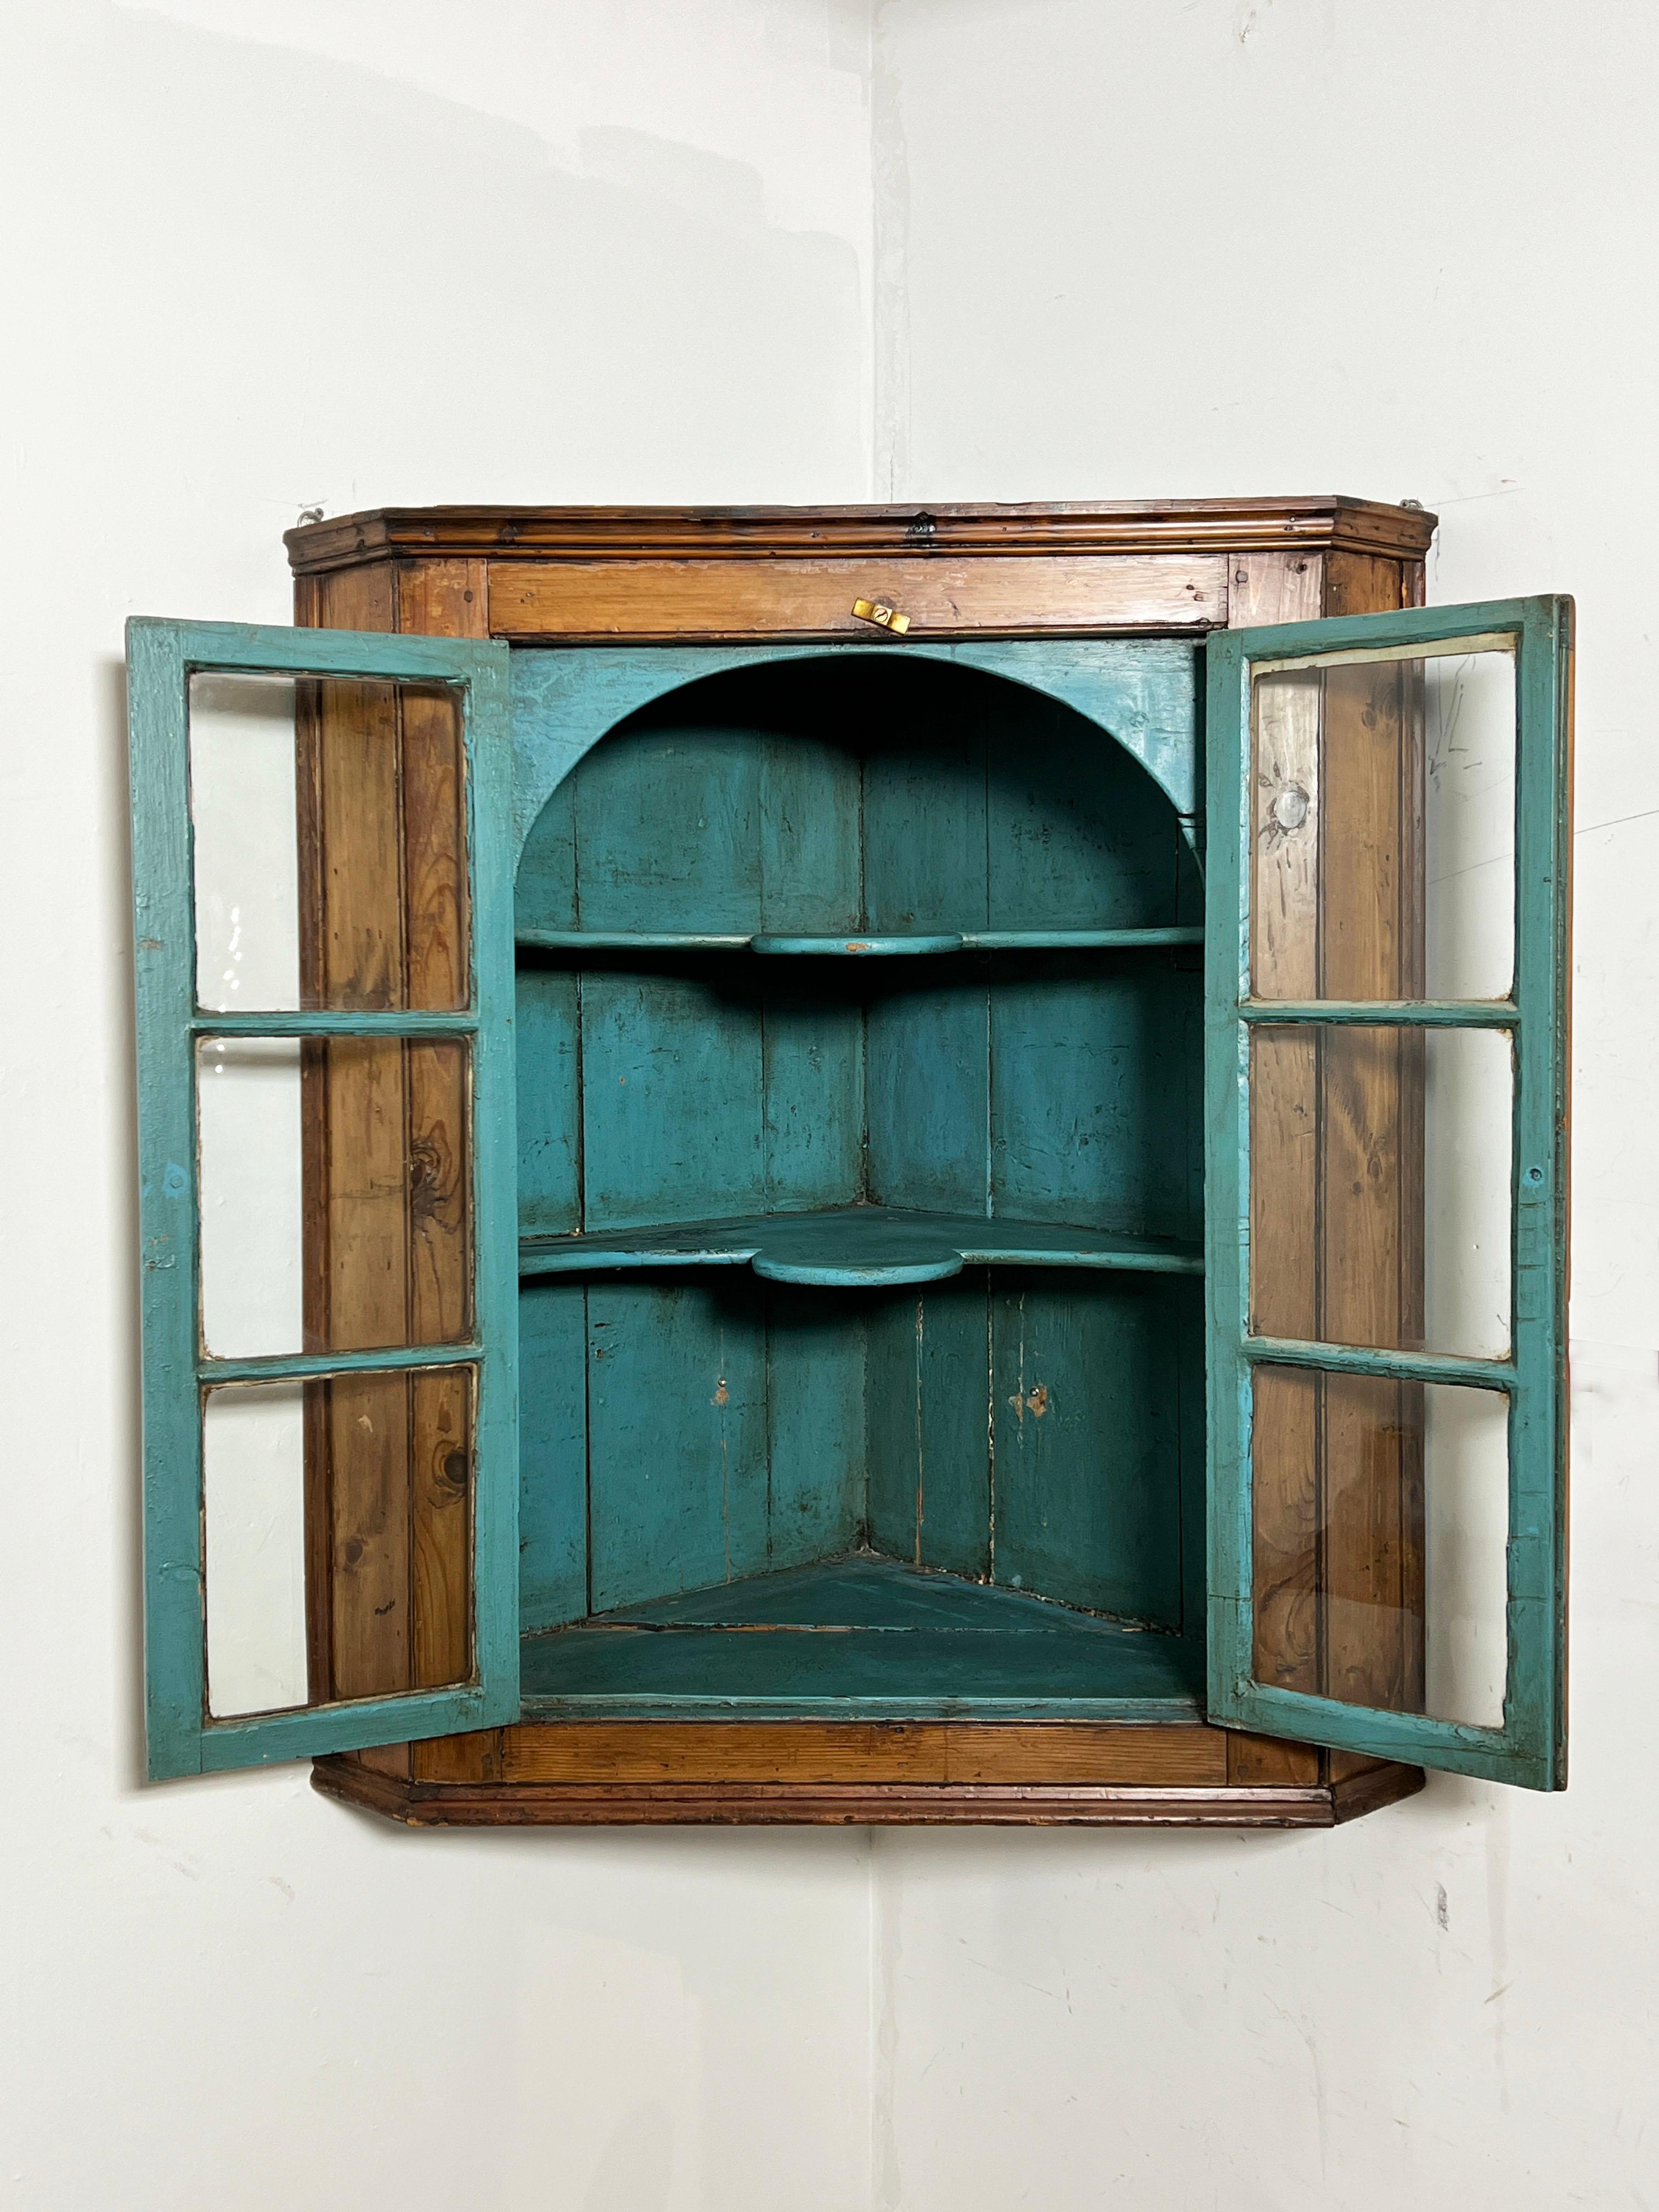 An 18th century New England hanging pine corner cupboard ca. 1760 with a Prussian-blue arched interior and paned glass doors.